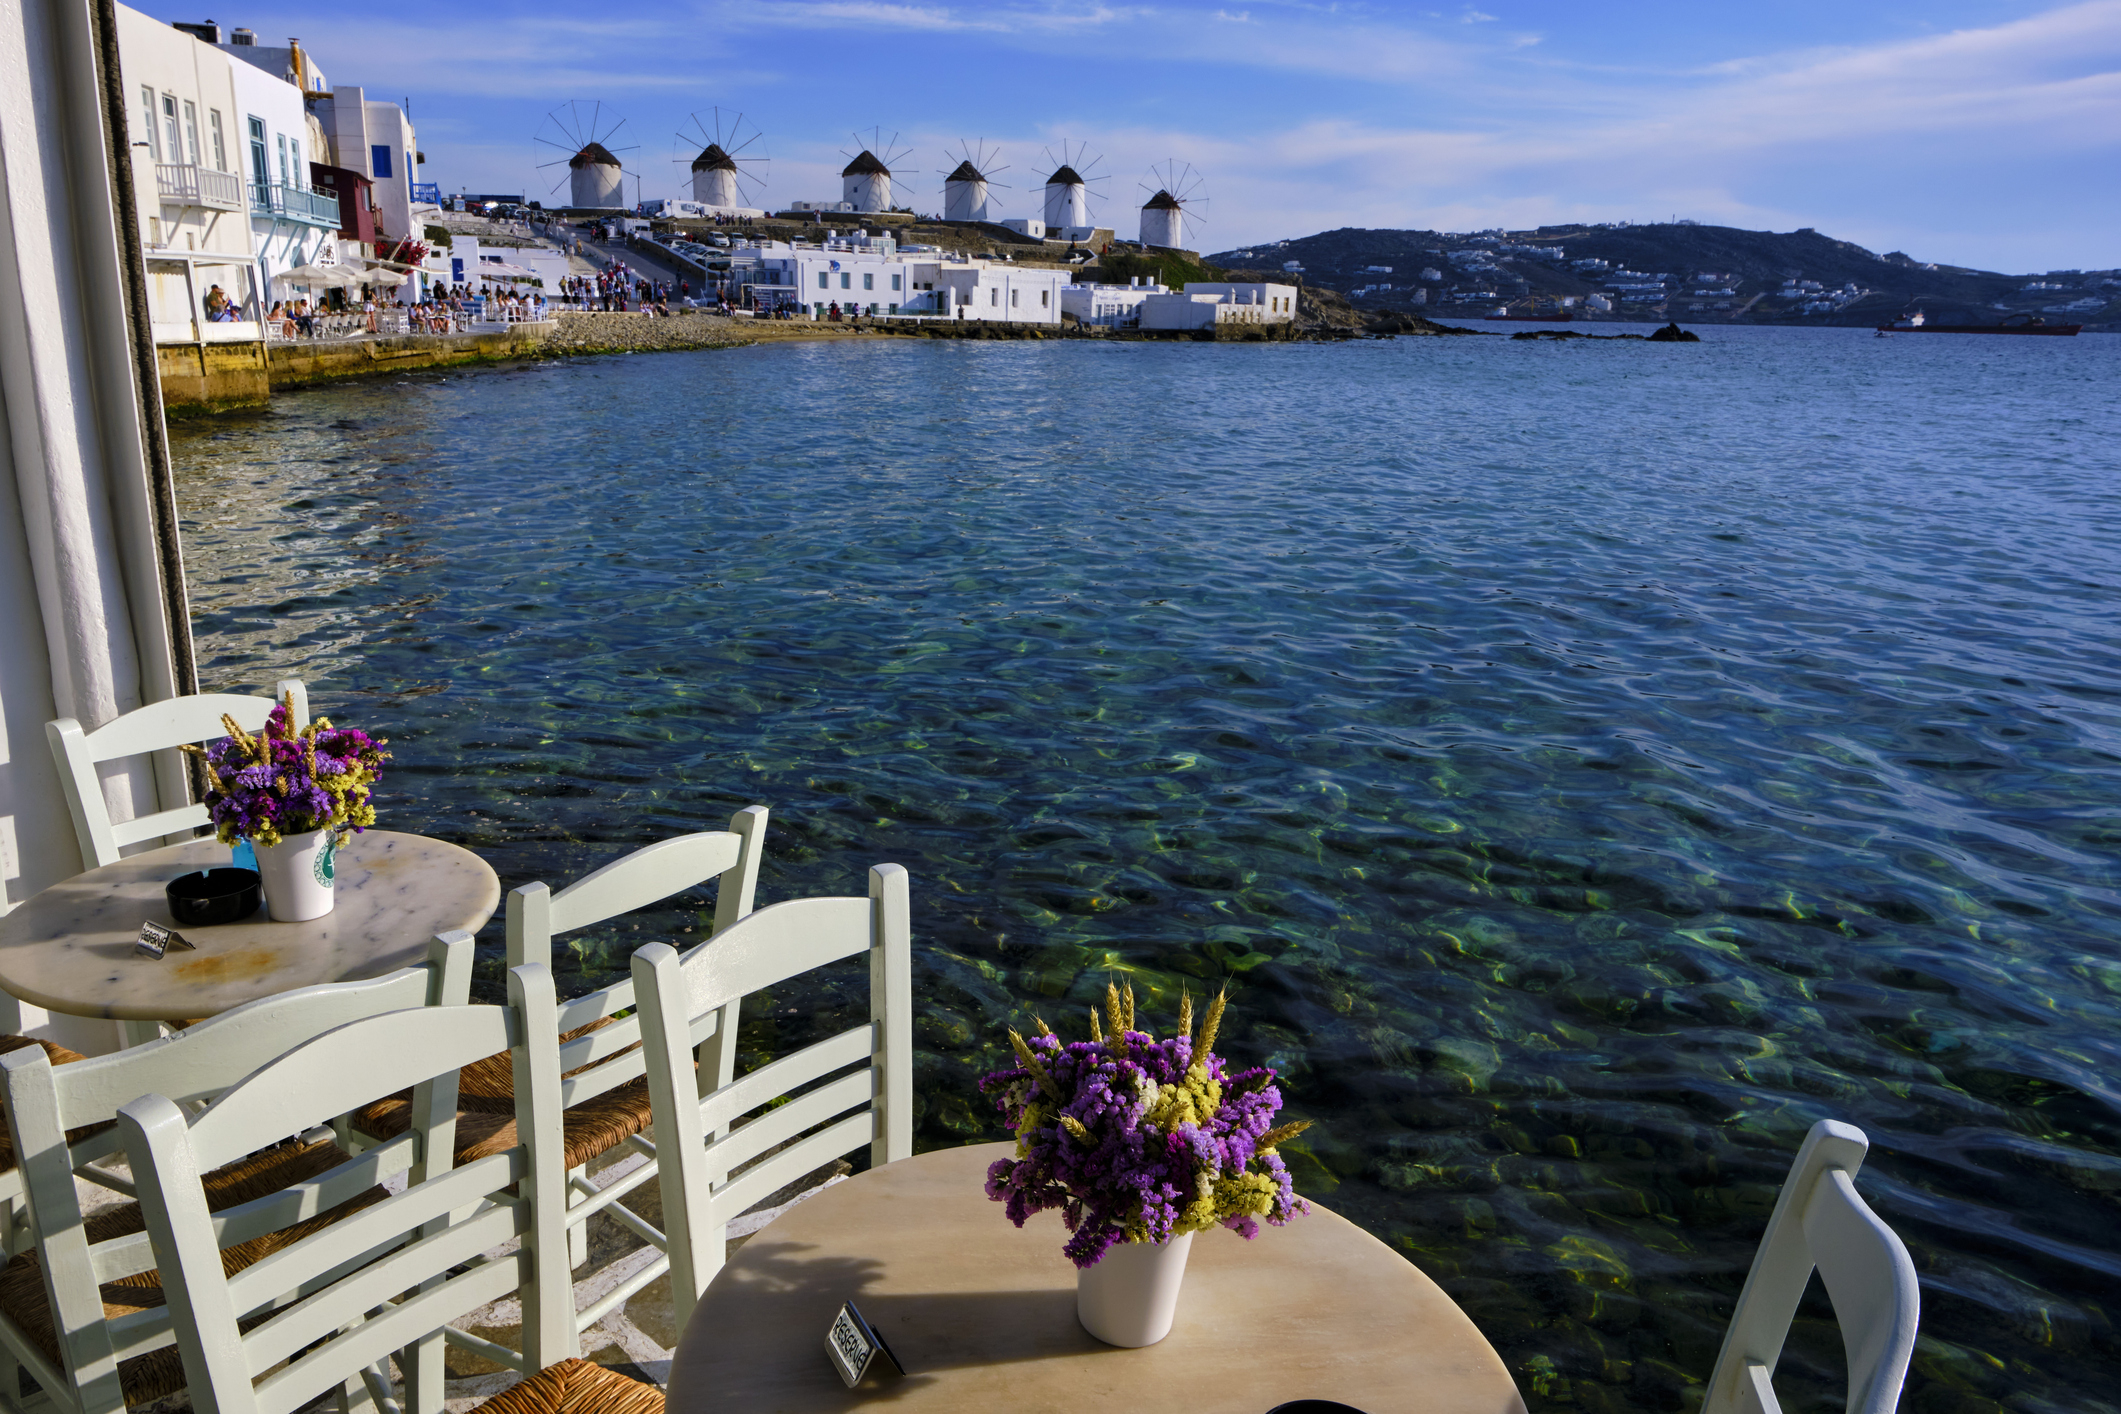 Outdoor seating at a seaside cafe overlooking crystal-clear water and distant traditional windmills in Mykonos, Greece, with tables adorned with purple flowers